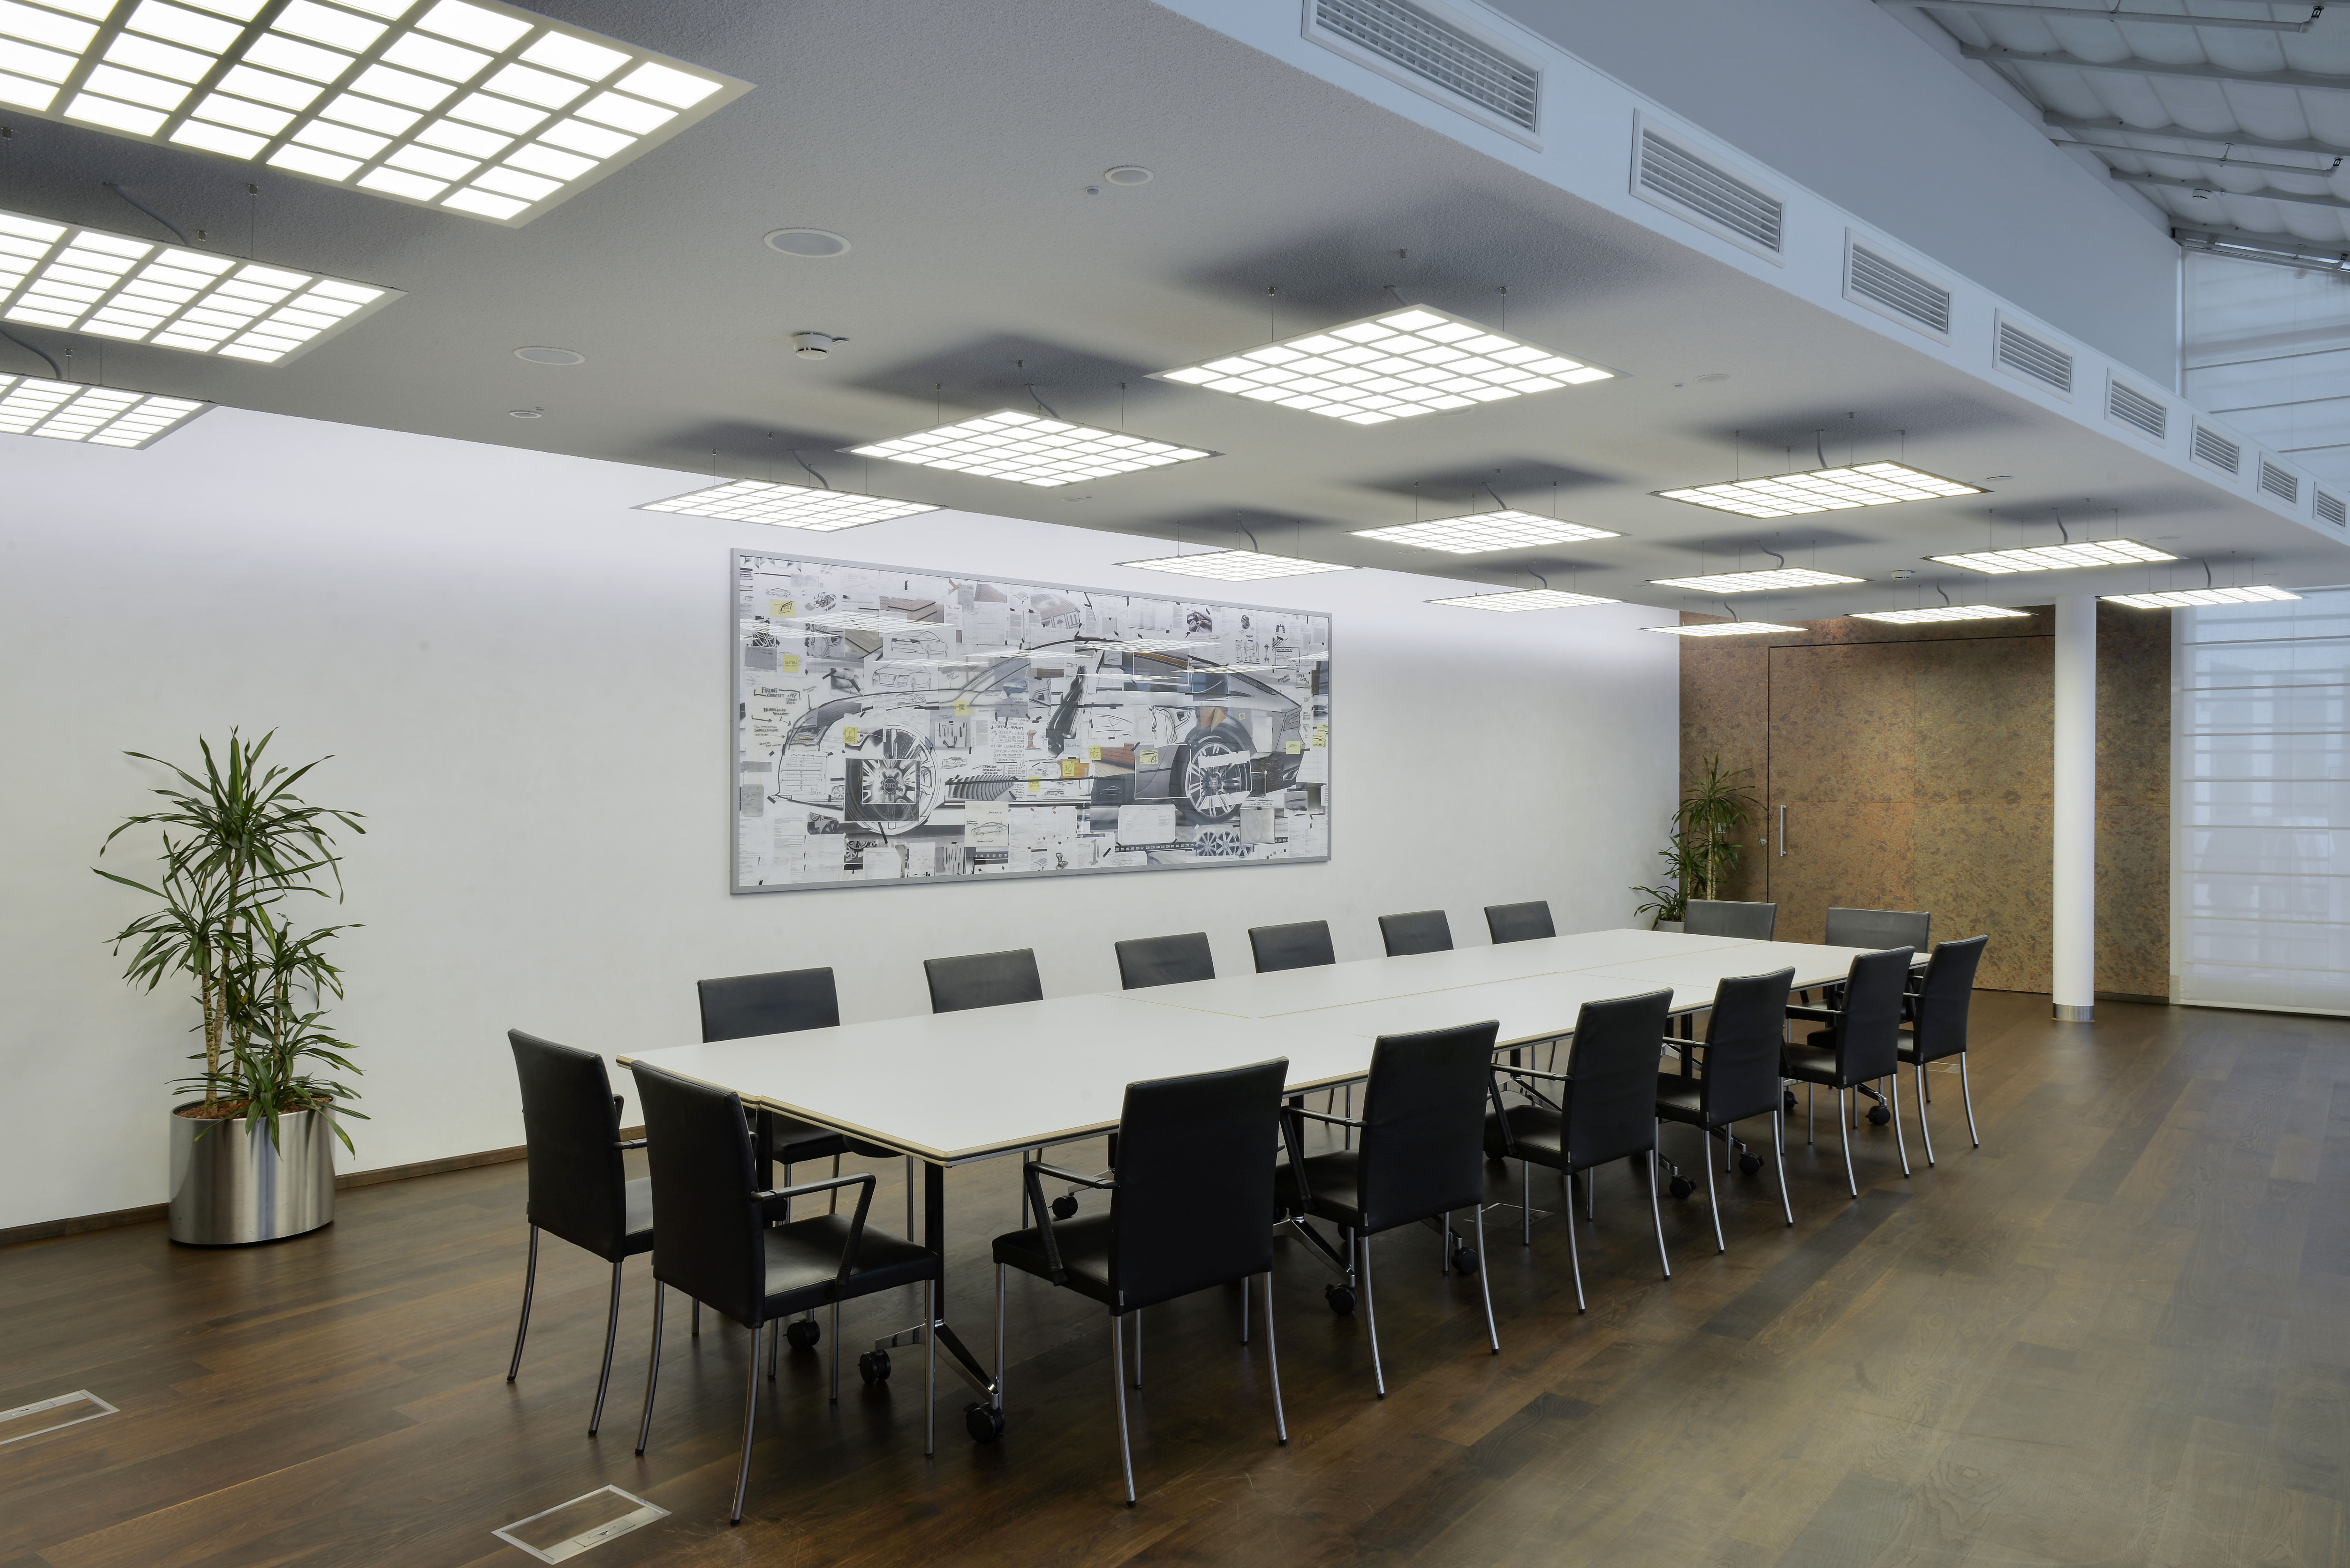 conference room at Audi Forum with OLED luminaires